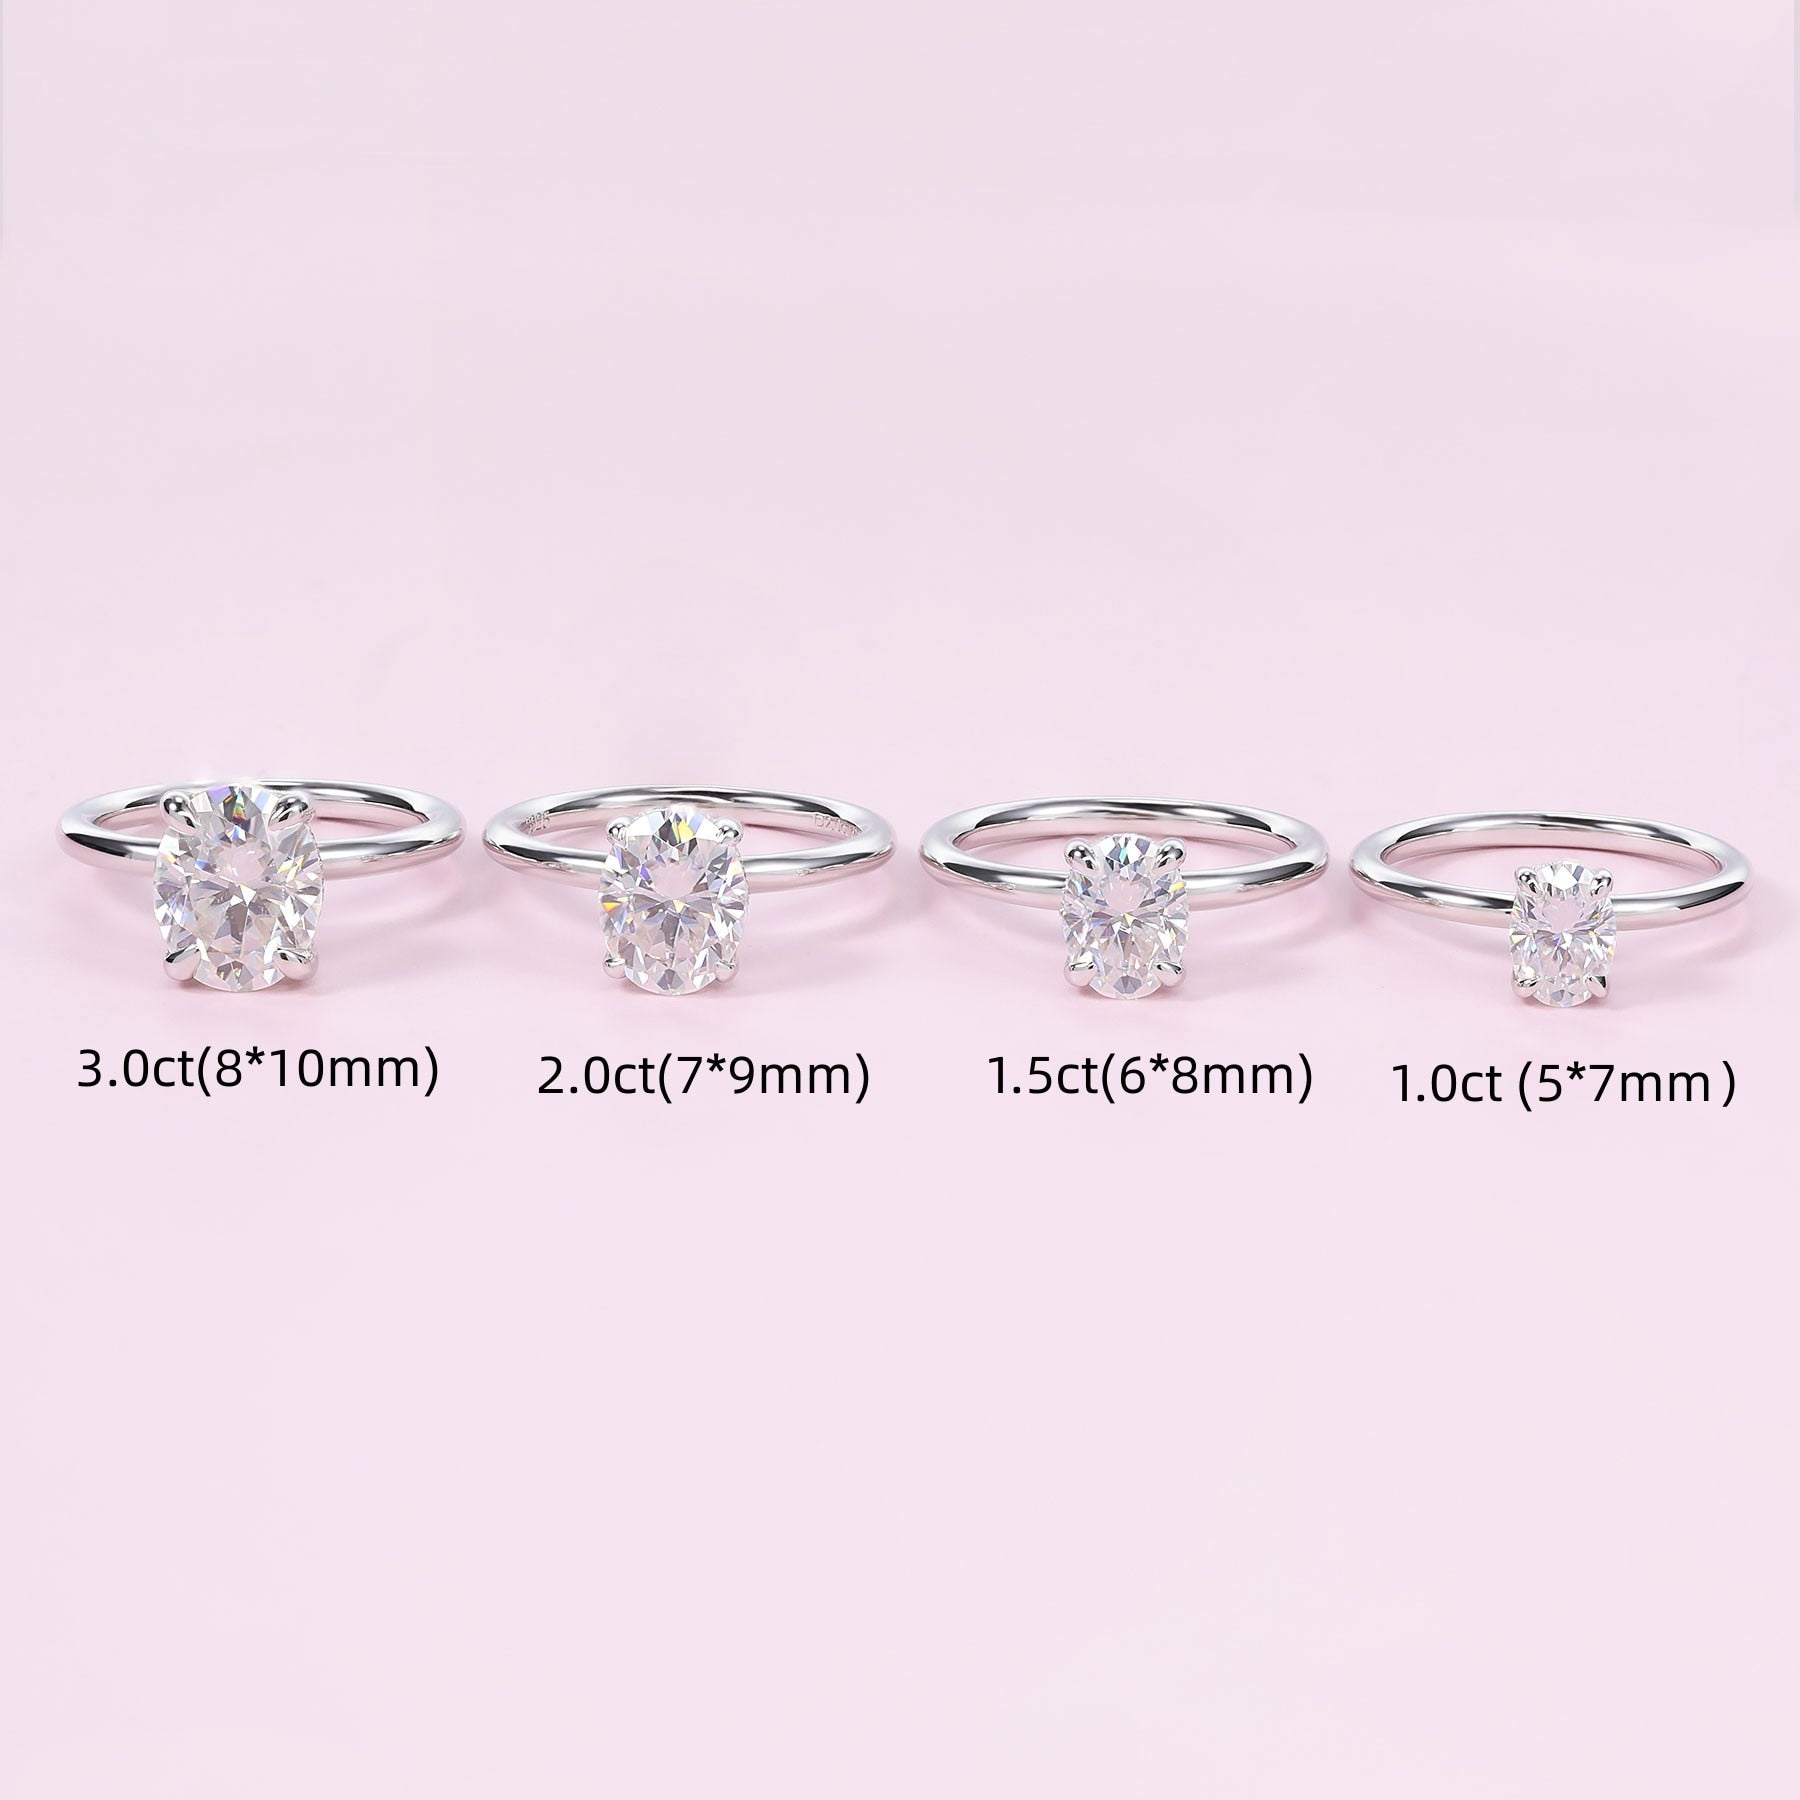 Four silver oval cut hidden halo engagement rings of varying stone sizes.